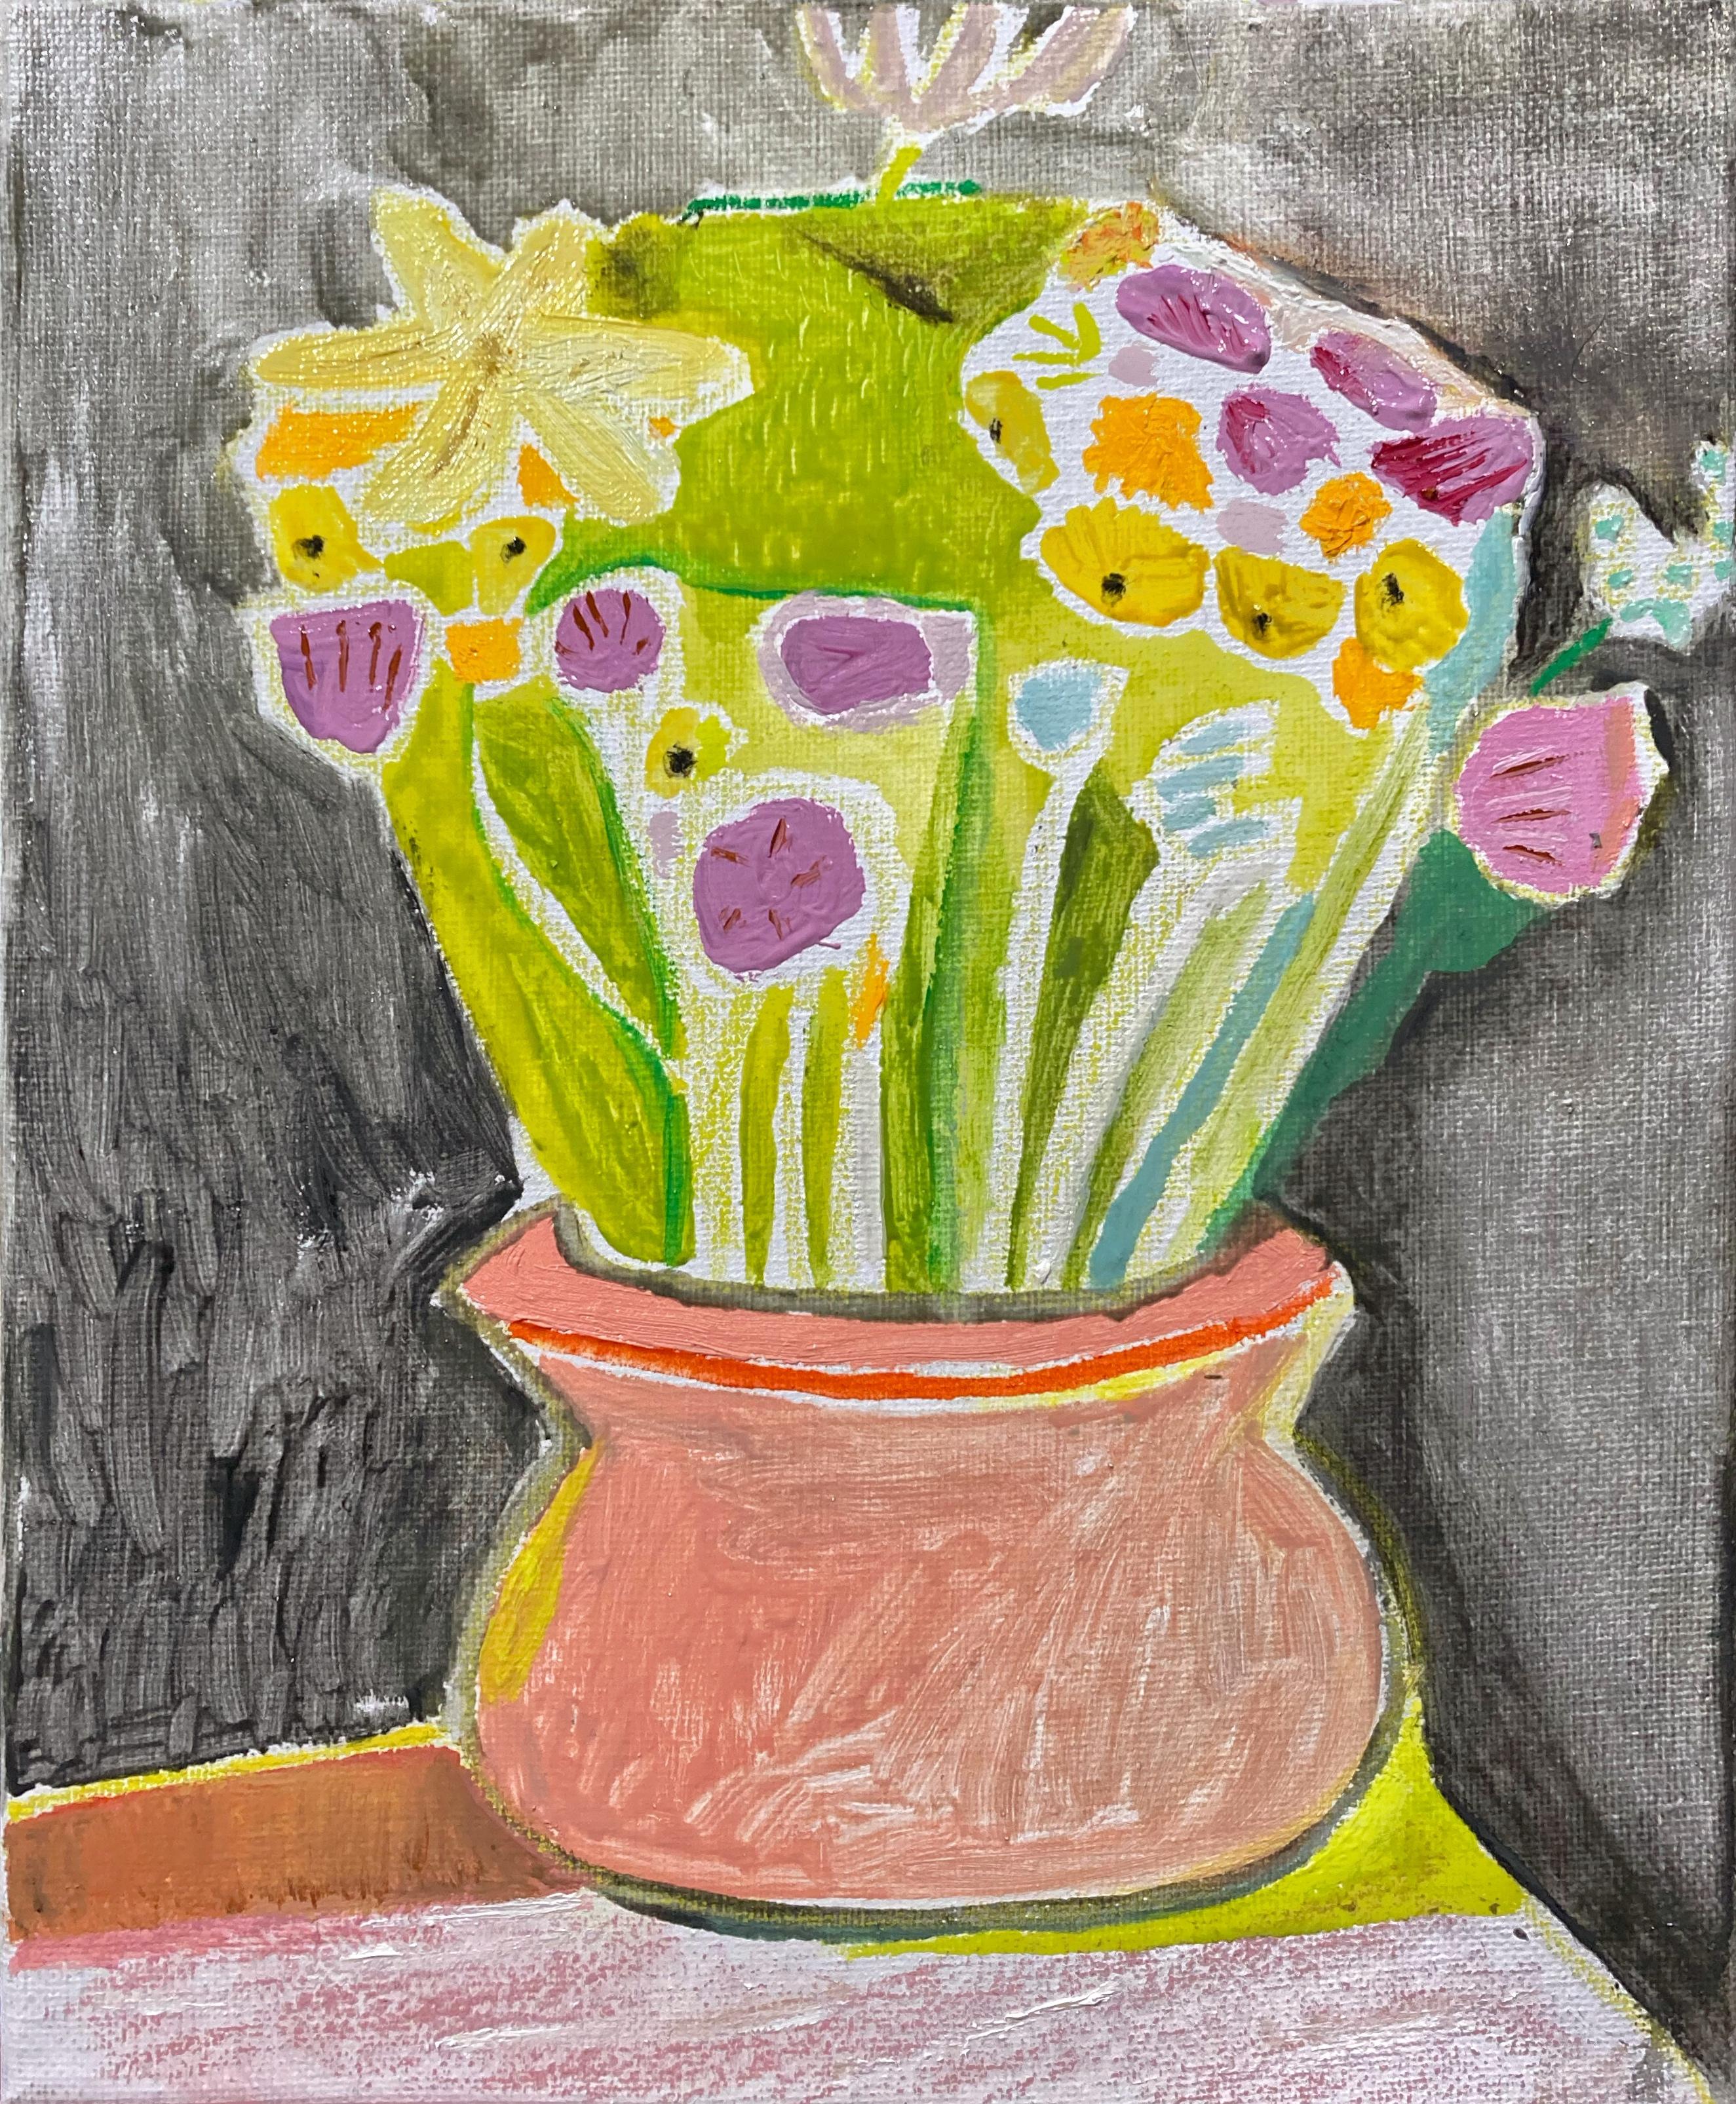 Dear Flowers- Acrylic Paint, Panel, Pastel, Flowers, Abstract, Still Life, Green - Painting by John Paul Kesling